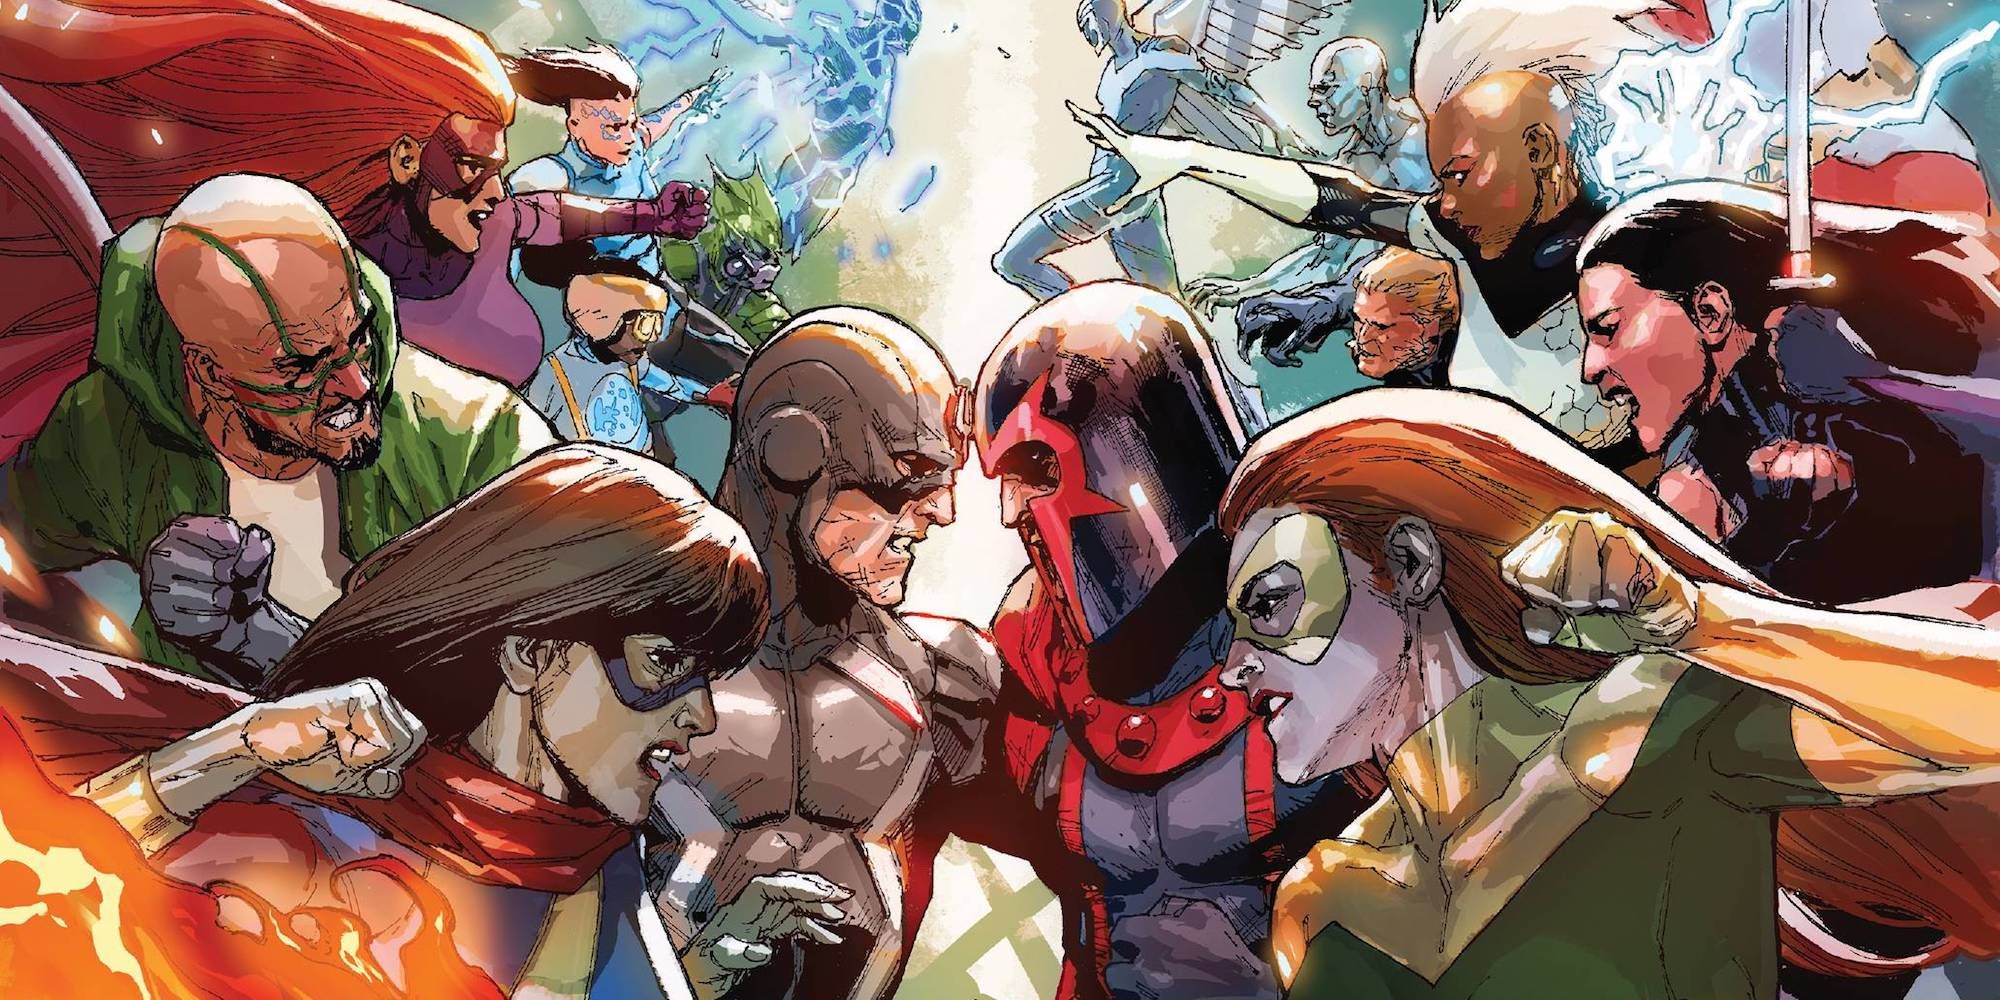 Image of the Inhumans and X-Men facing off in Marvel Comics.